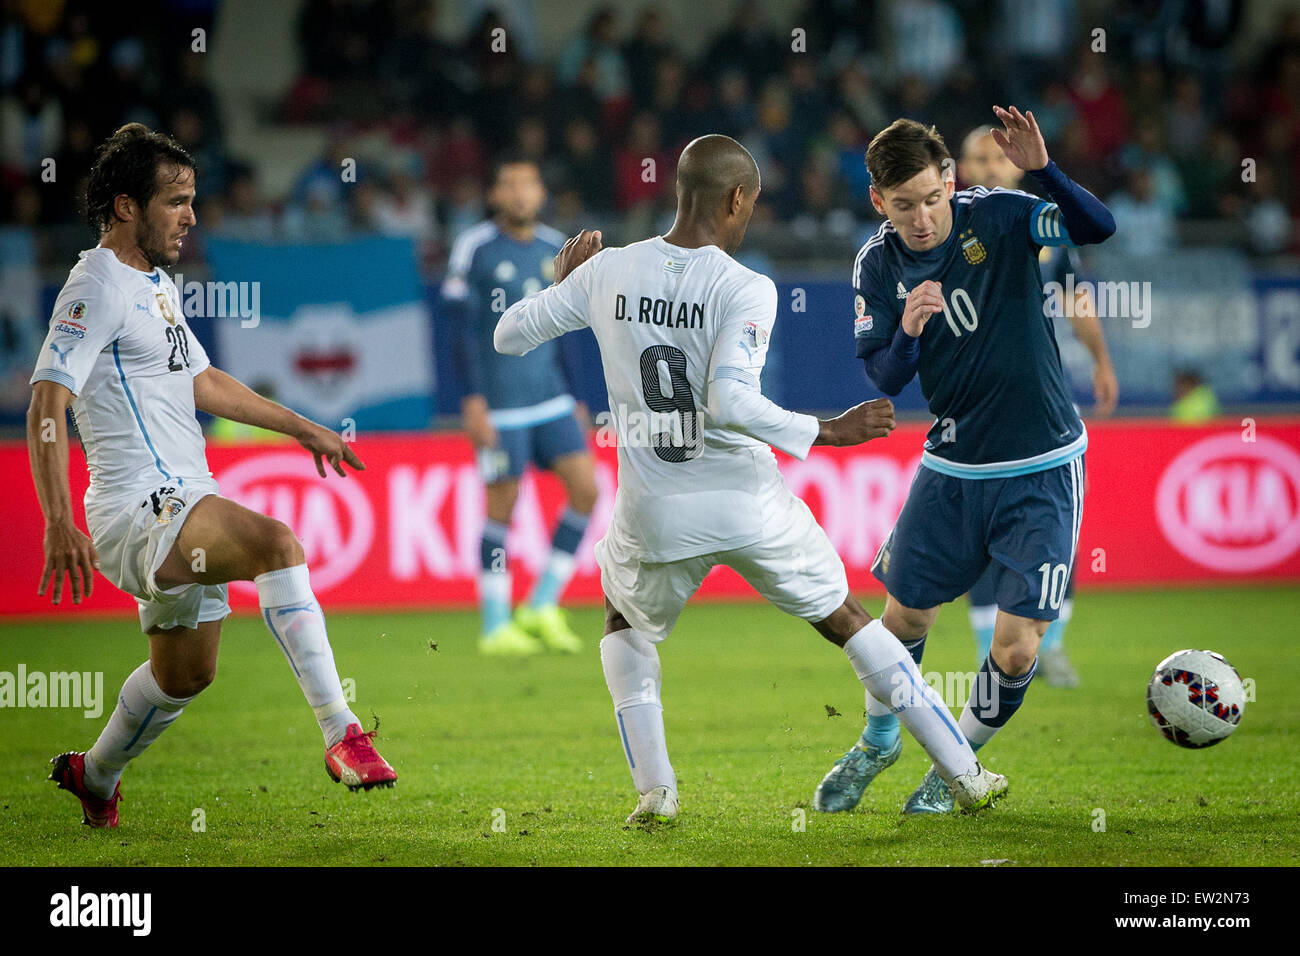 La Serena, Chile. 16th June, 2015. Lionel Messi (R) of Argentina vies for the ball with Alvaro Gonzalez (L) and Diego Rolan of Uruguay during the Group B match of the 2015 American Cup, at La Portada stadium, in La Serena, Chile, on June 16, 2015. Argentina won 1-0. Credit:  Pedro Mera/Xinhua/Alamy Live News Stock Photo